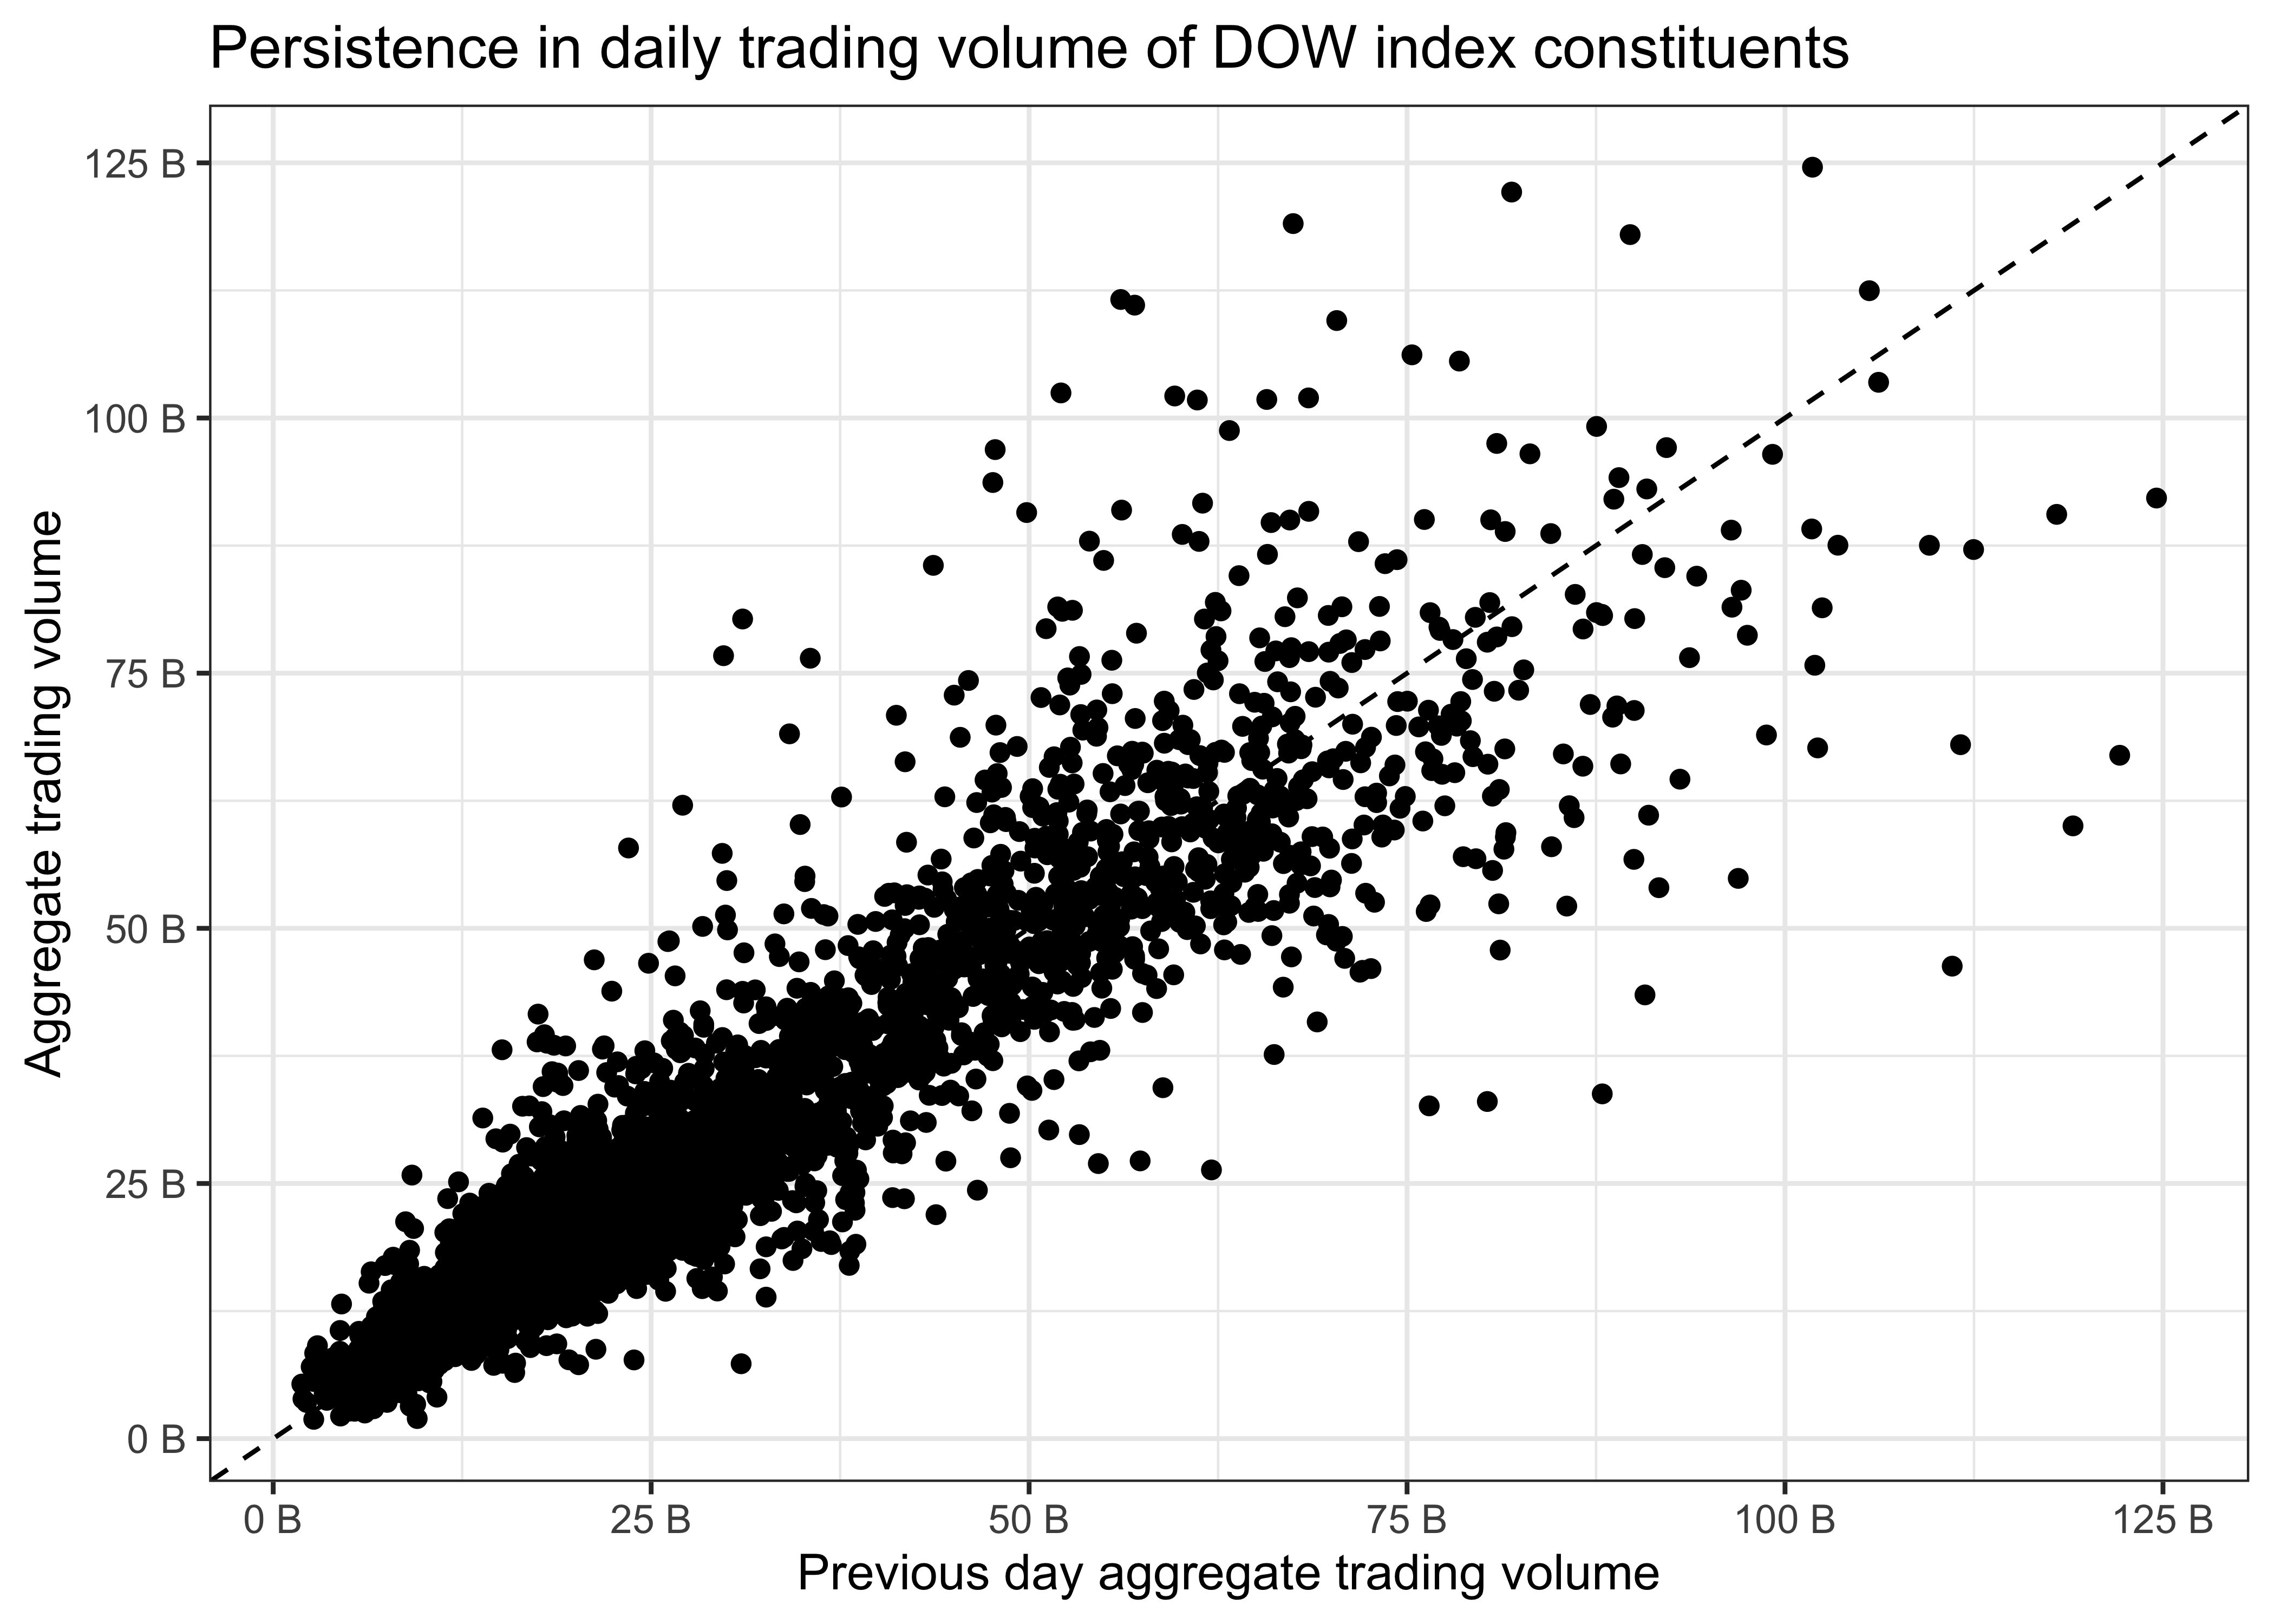 Title: Persistence in daily trading volume of DOW index constituents. The figure shows a scatterplot where aggregate trading volume and previous-day aggregate trading volume neatly line up along a 45-degree line.